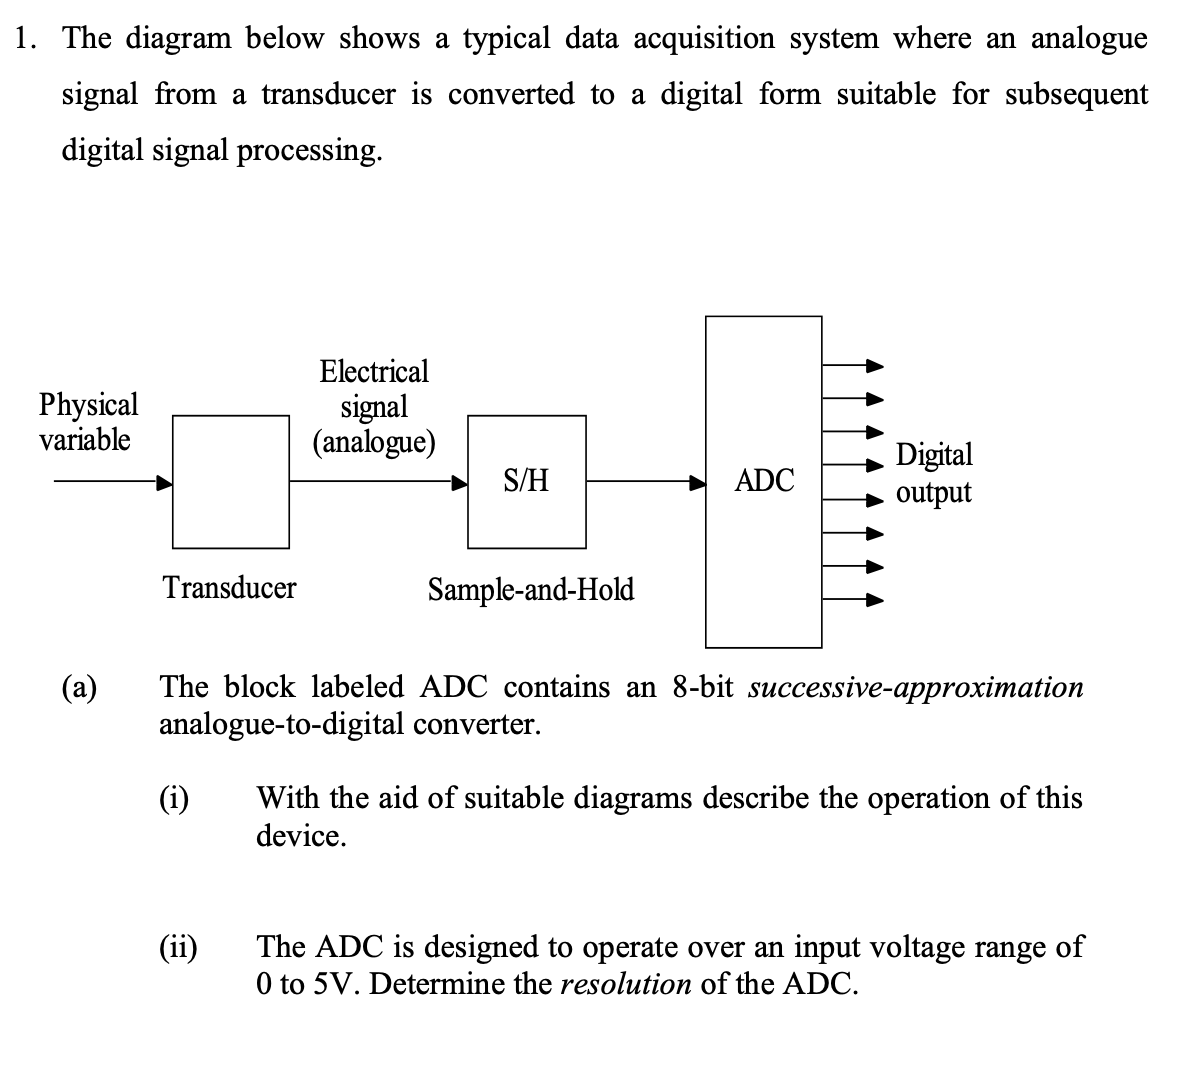 1. The diagram below shows a typical data acquisition system where an analogue
signal from a transducer is converted to a digital form suitable for subsequent
digital signal processing.
Electrical
Physical
variable
signal
(analogue)
Digital
output
S/H
ADC
Transducer
Sample-and-Hold
The block labeled ADC contains an 8-bit successive-approximation
analogue-to-digital converter.
(a)
(i)
With the aid of suitable diagrams describe the operation of this
device.
(ii)
The ADC is designed to operate over an input voltage range of
0 to 5V. Determine the resolution of the ADC.
